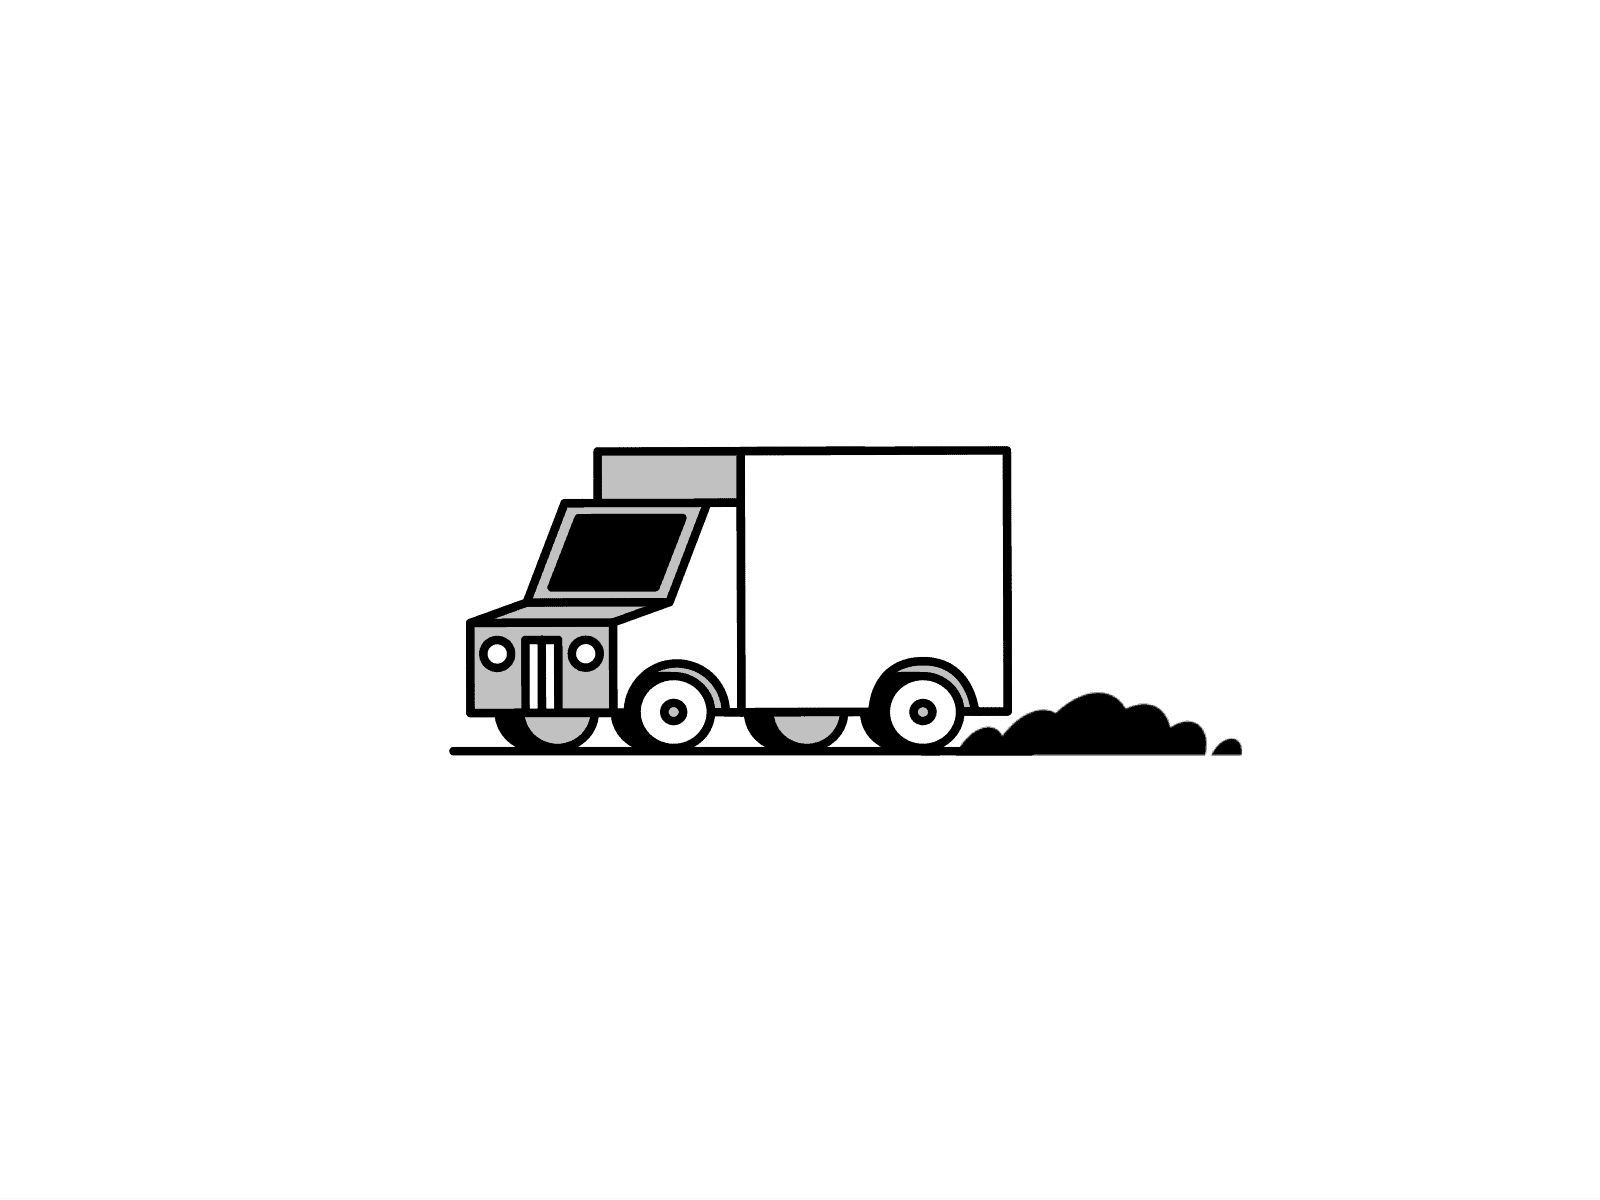 Package/Delivery Truck Transition amazon animation delivery design filippo marchetti gummy illustration logo animation lorry minimal motion graphics shipping smear squash stretch transition truck